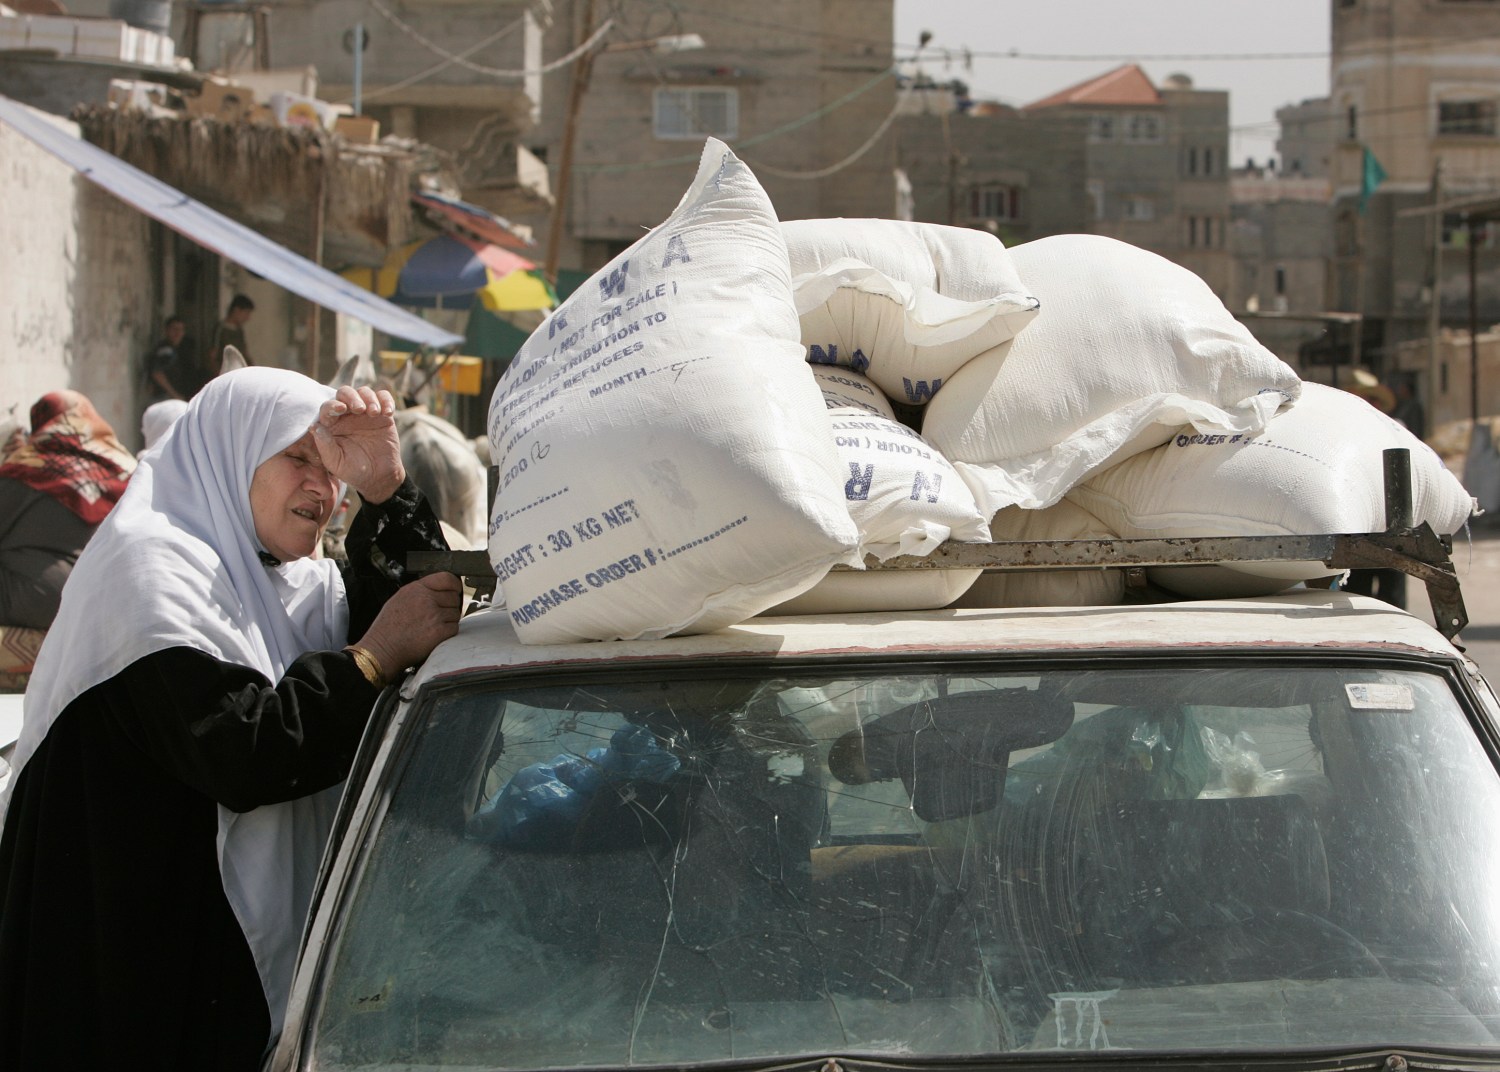 A Palestinian woman rests next to a car after receiving food supplies from the United Nations Works and Relief Agency (UNRWA) headquarters at the Shati refugee camp in Gaza May 5, 2008. The United Nations is set to halt delivery of humanitarian aid to the Gaza Strip on Monday because its vehicles have run out of fuel, a U.N. official said. REUTERS/Suhaib Salem (GAZA) -